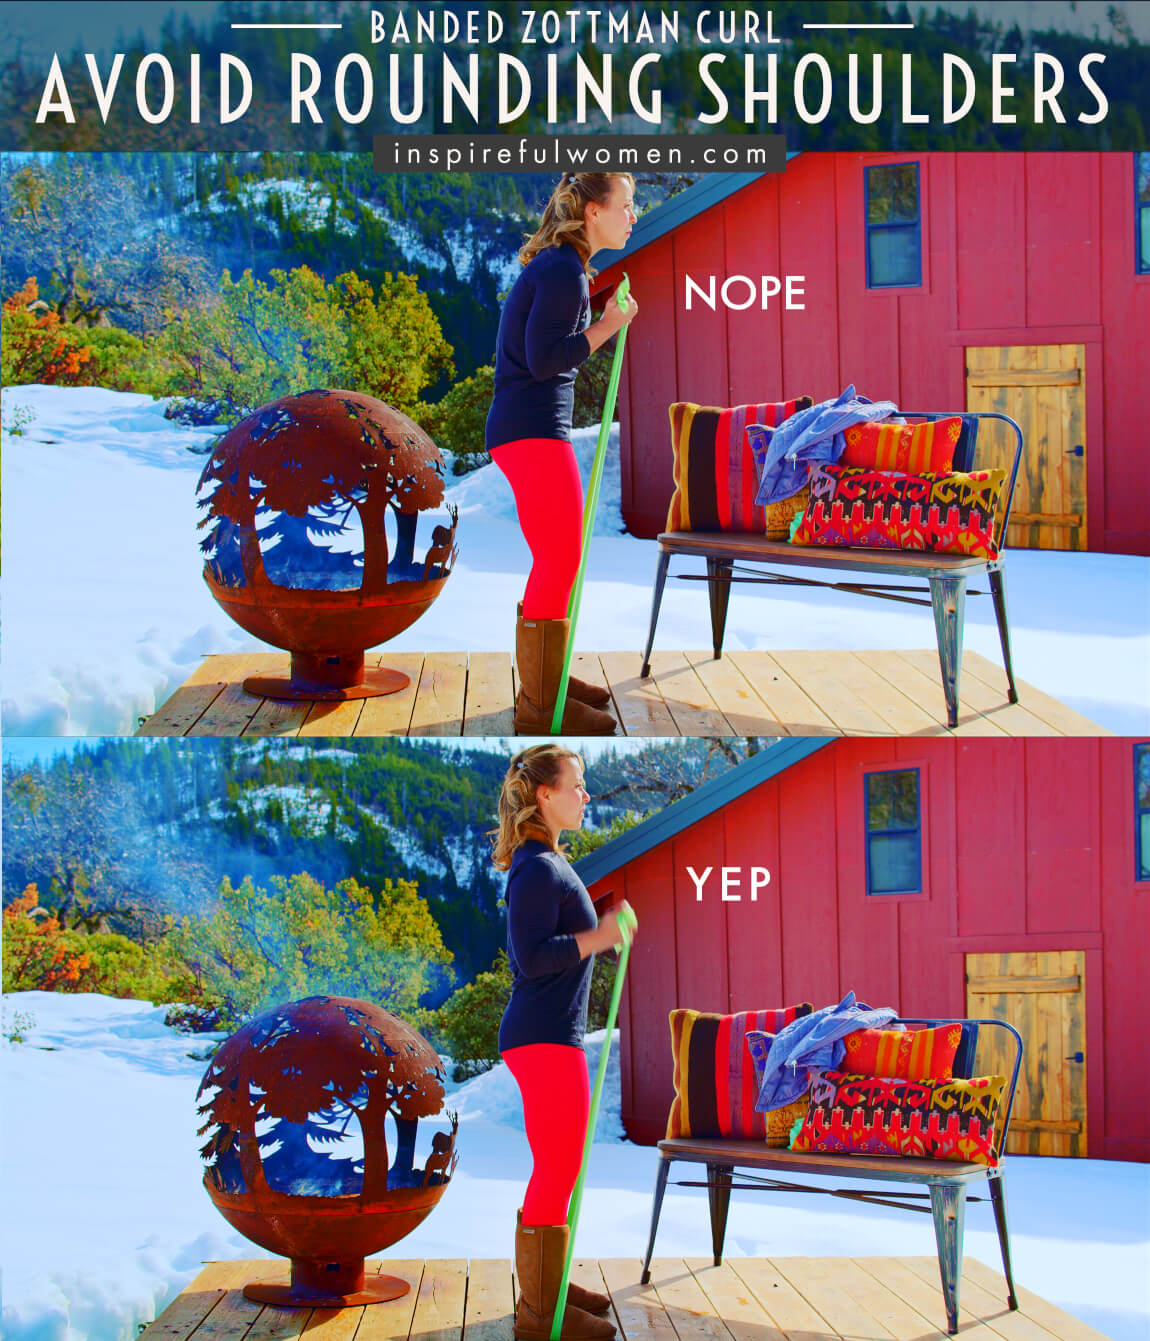 avoid-rounding-shoulders-resistance-band-zottman-bicep-curl-common-mistakes